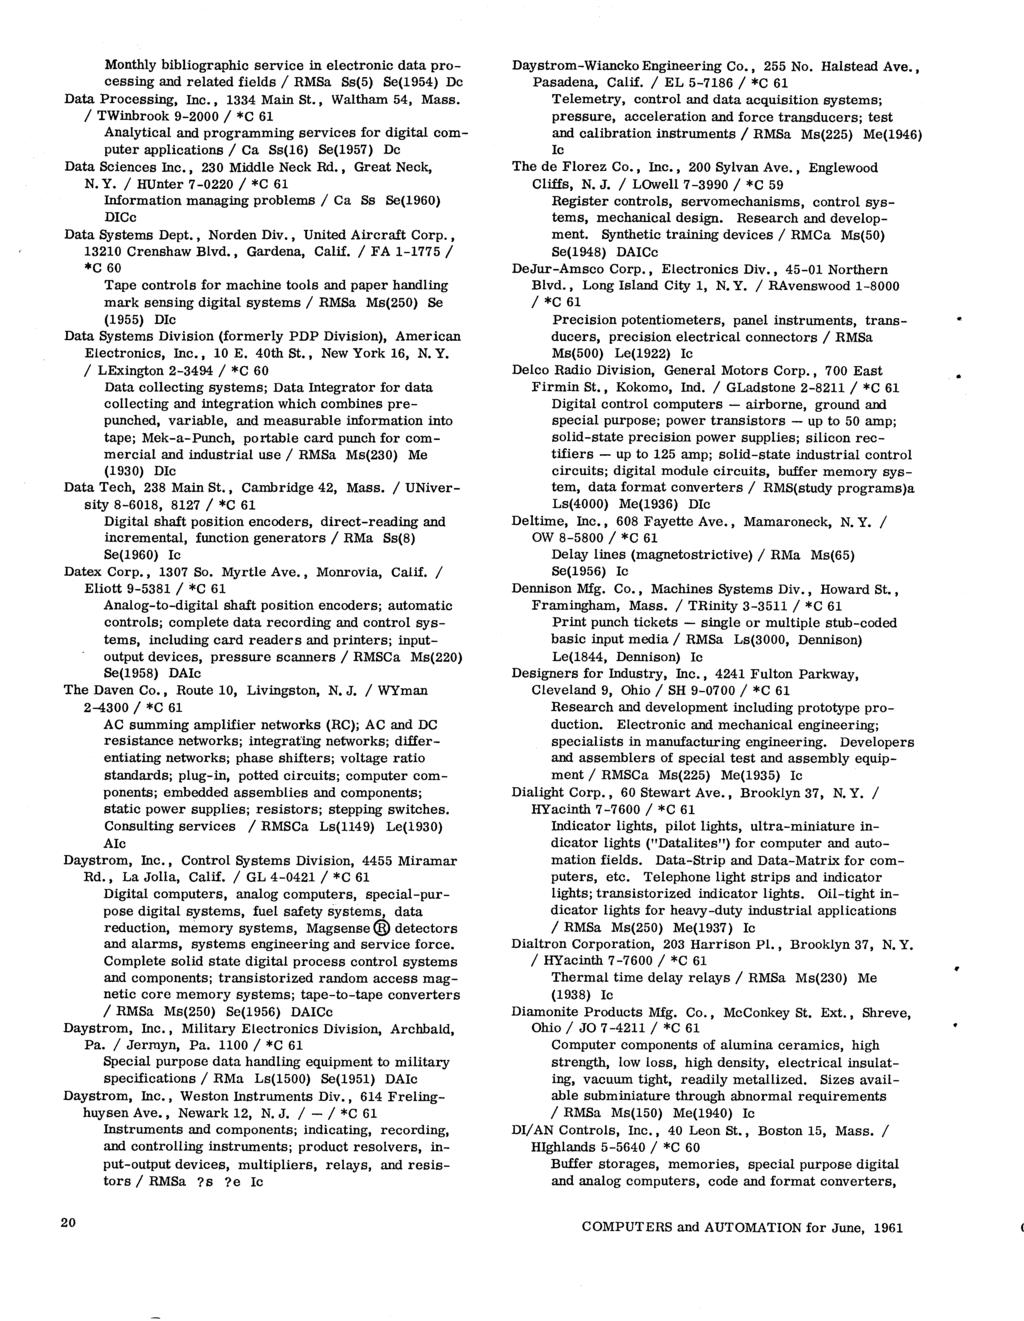 Monthly bibliographic service in electronic data processing and related fields / RMSa Ss(5) Se(1954) Dc Data Processing, Inc., 1334 Main St., Waltham 54, Mass.